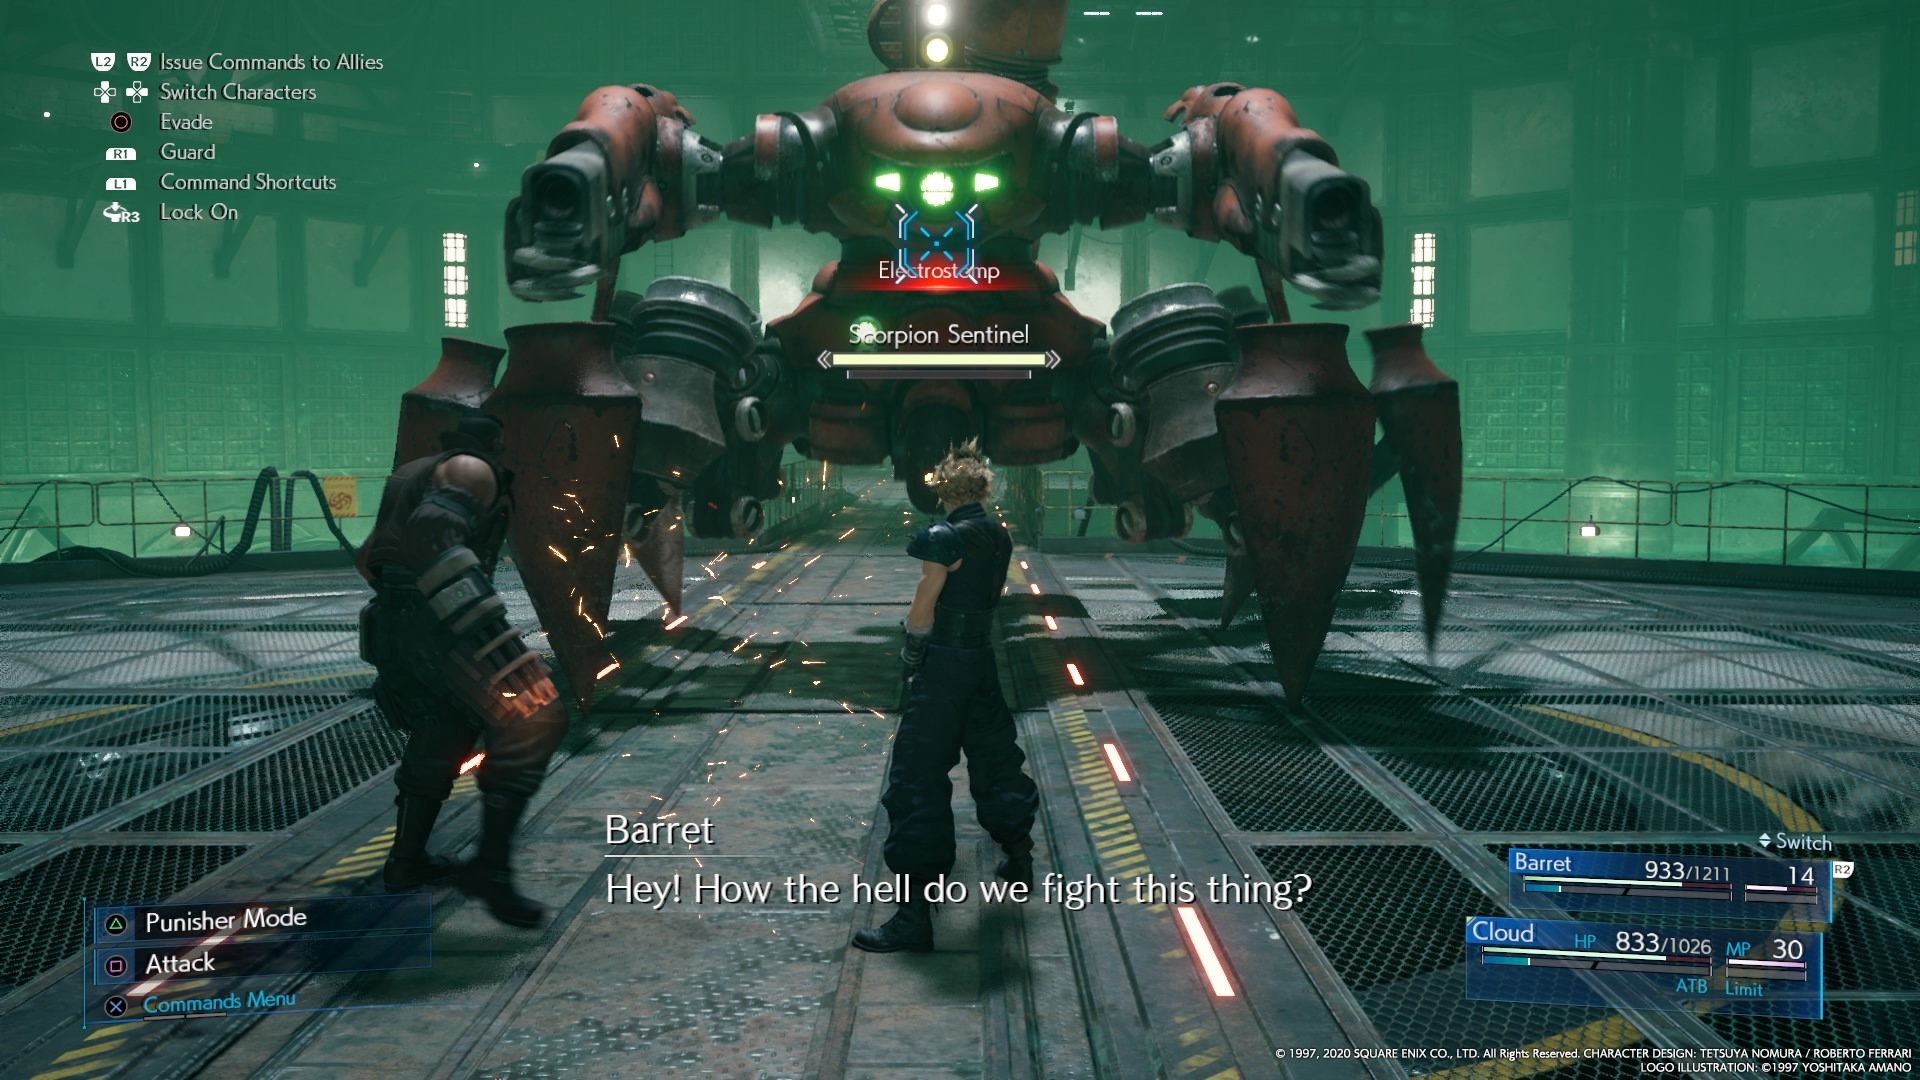 Final Fantasy 7 Remake may finally release on Xbox One & X/S